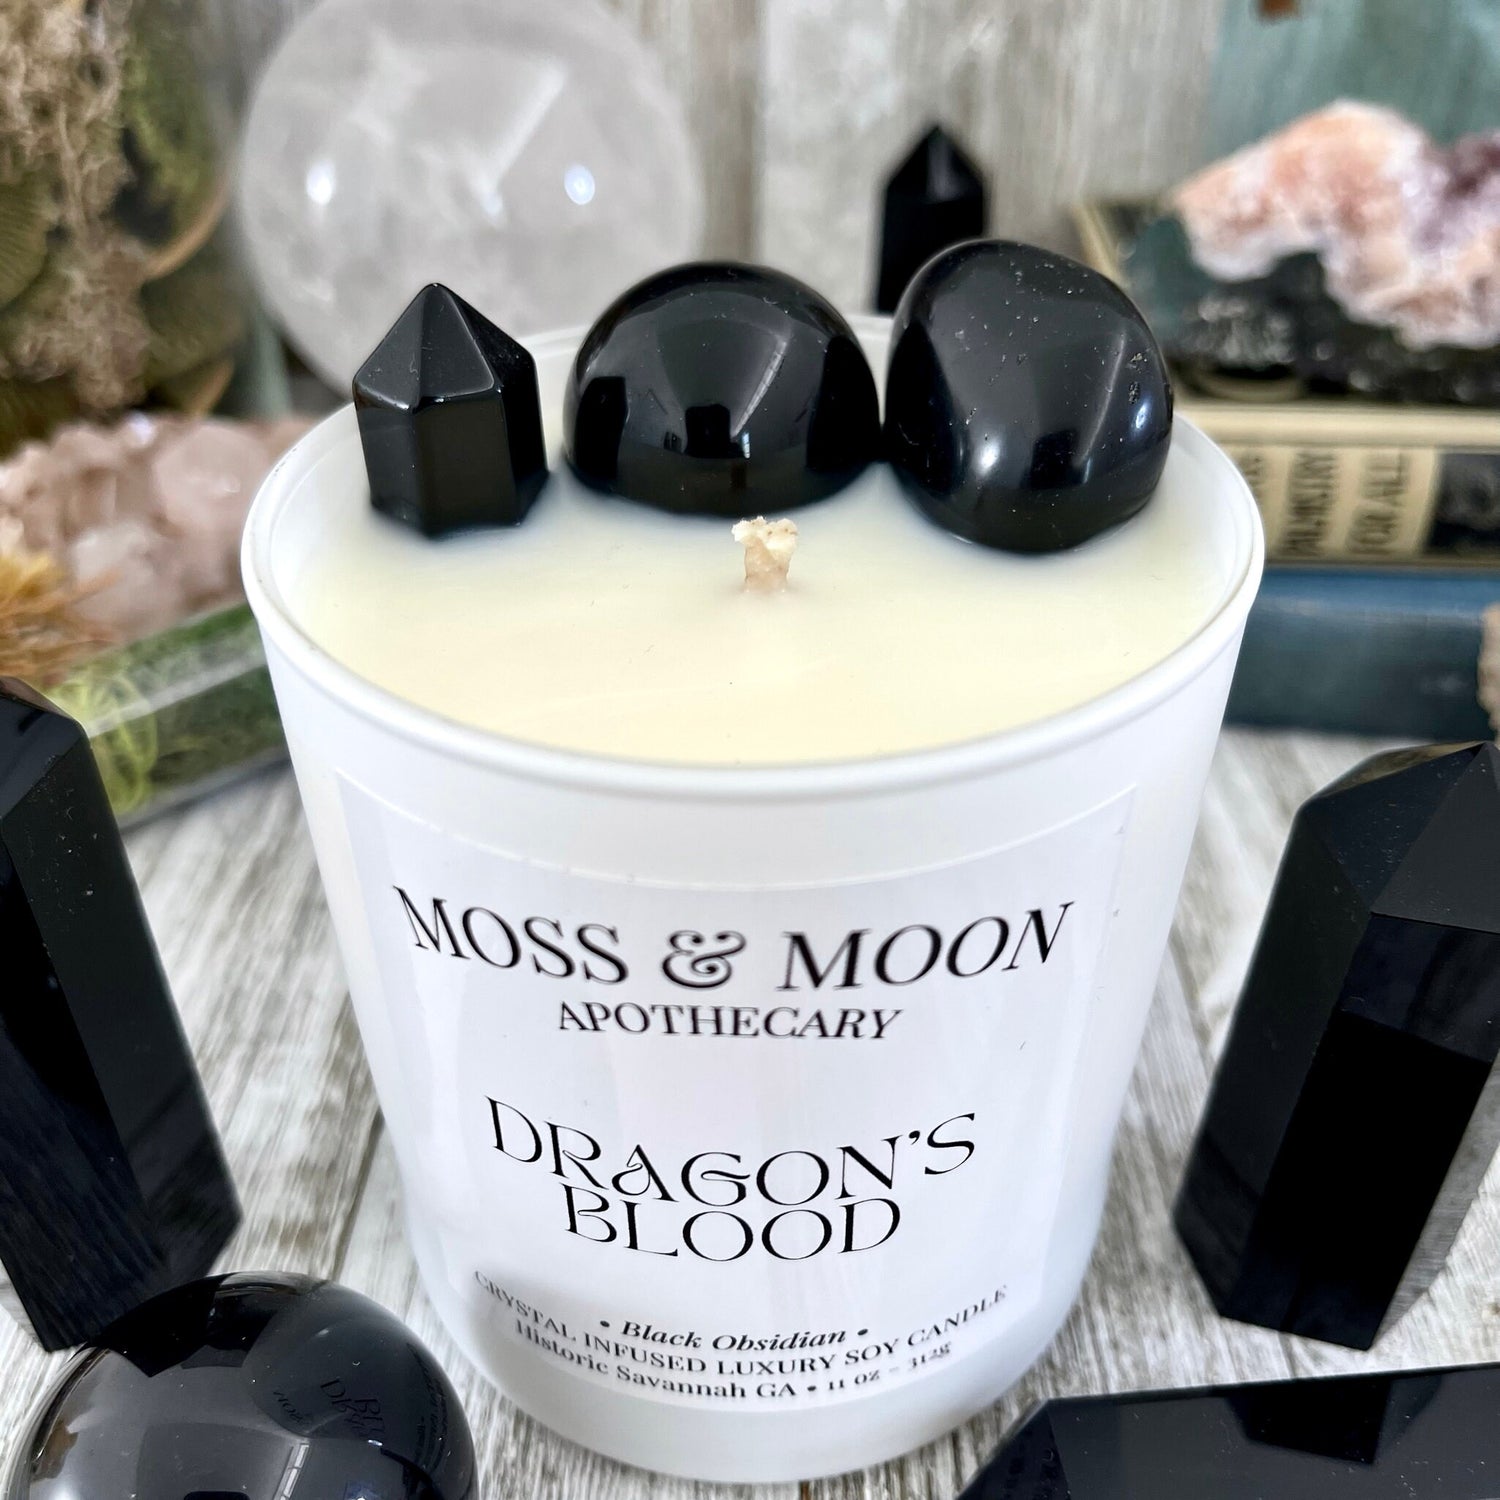 Dragon's Blood Candle with Black Obsidian - Moss & Moon Apothecary Luxury Soy Crystal Candle /